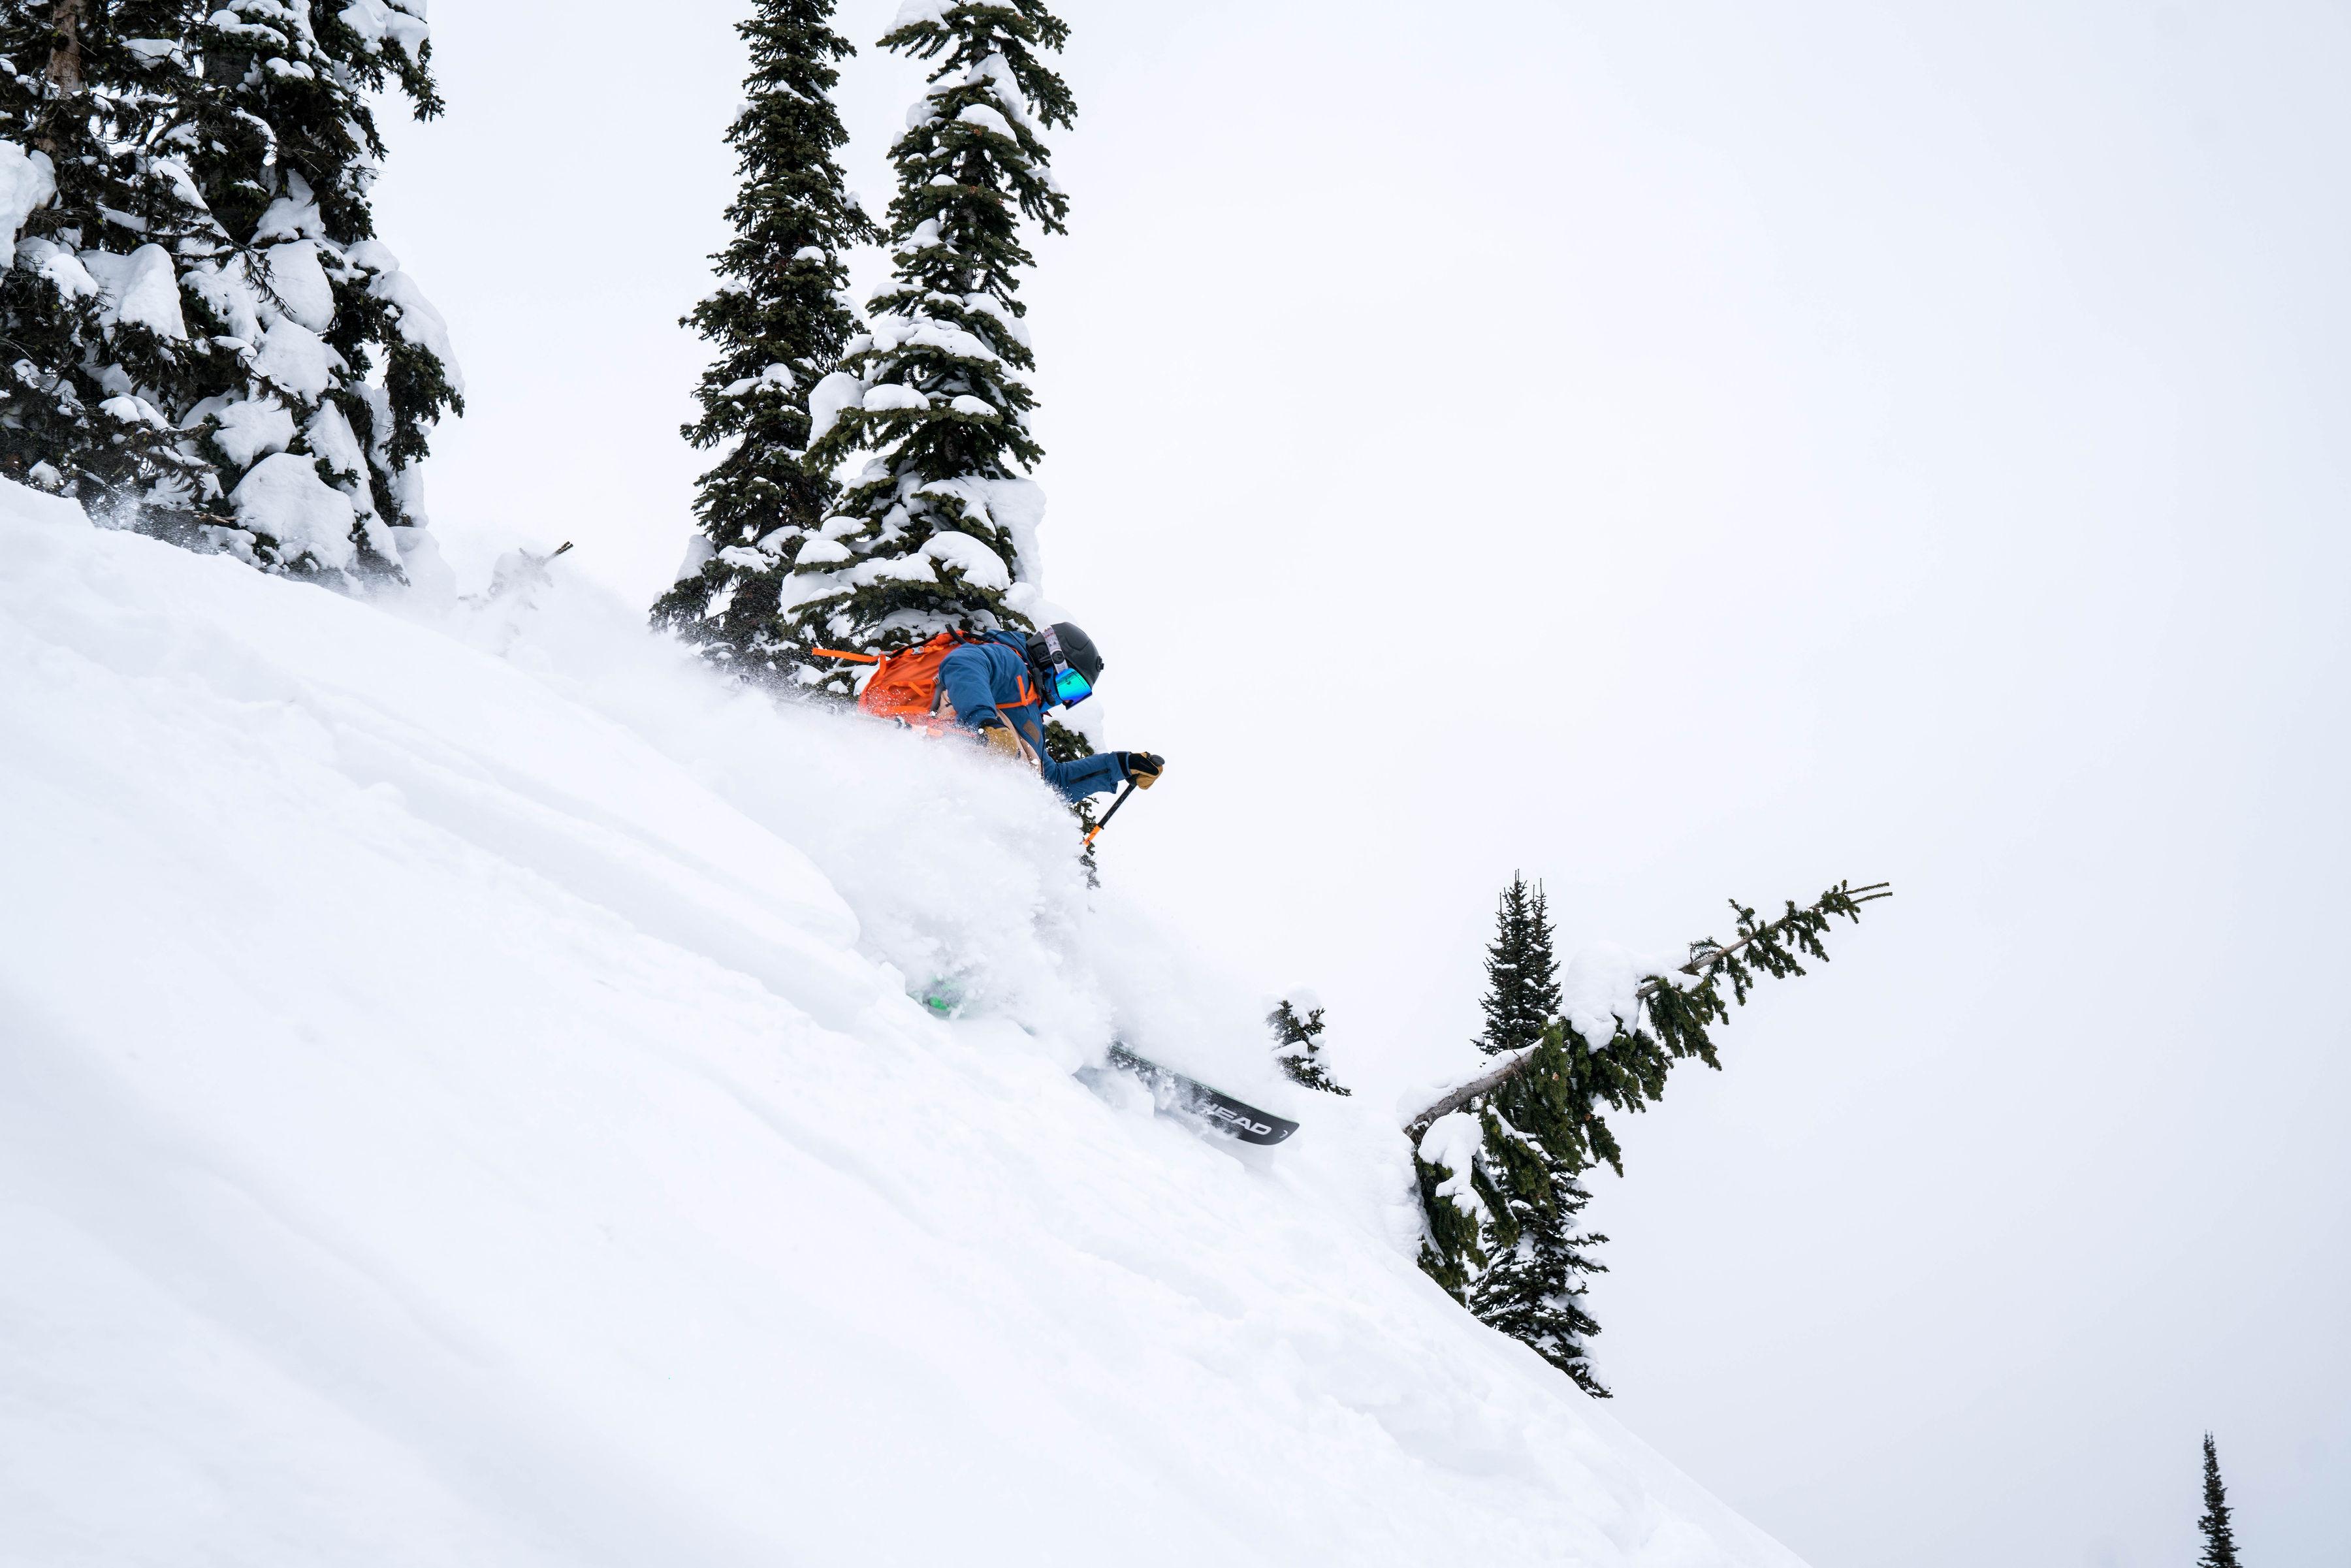 Half-day and full-day backcountry skiing available